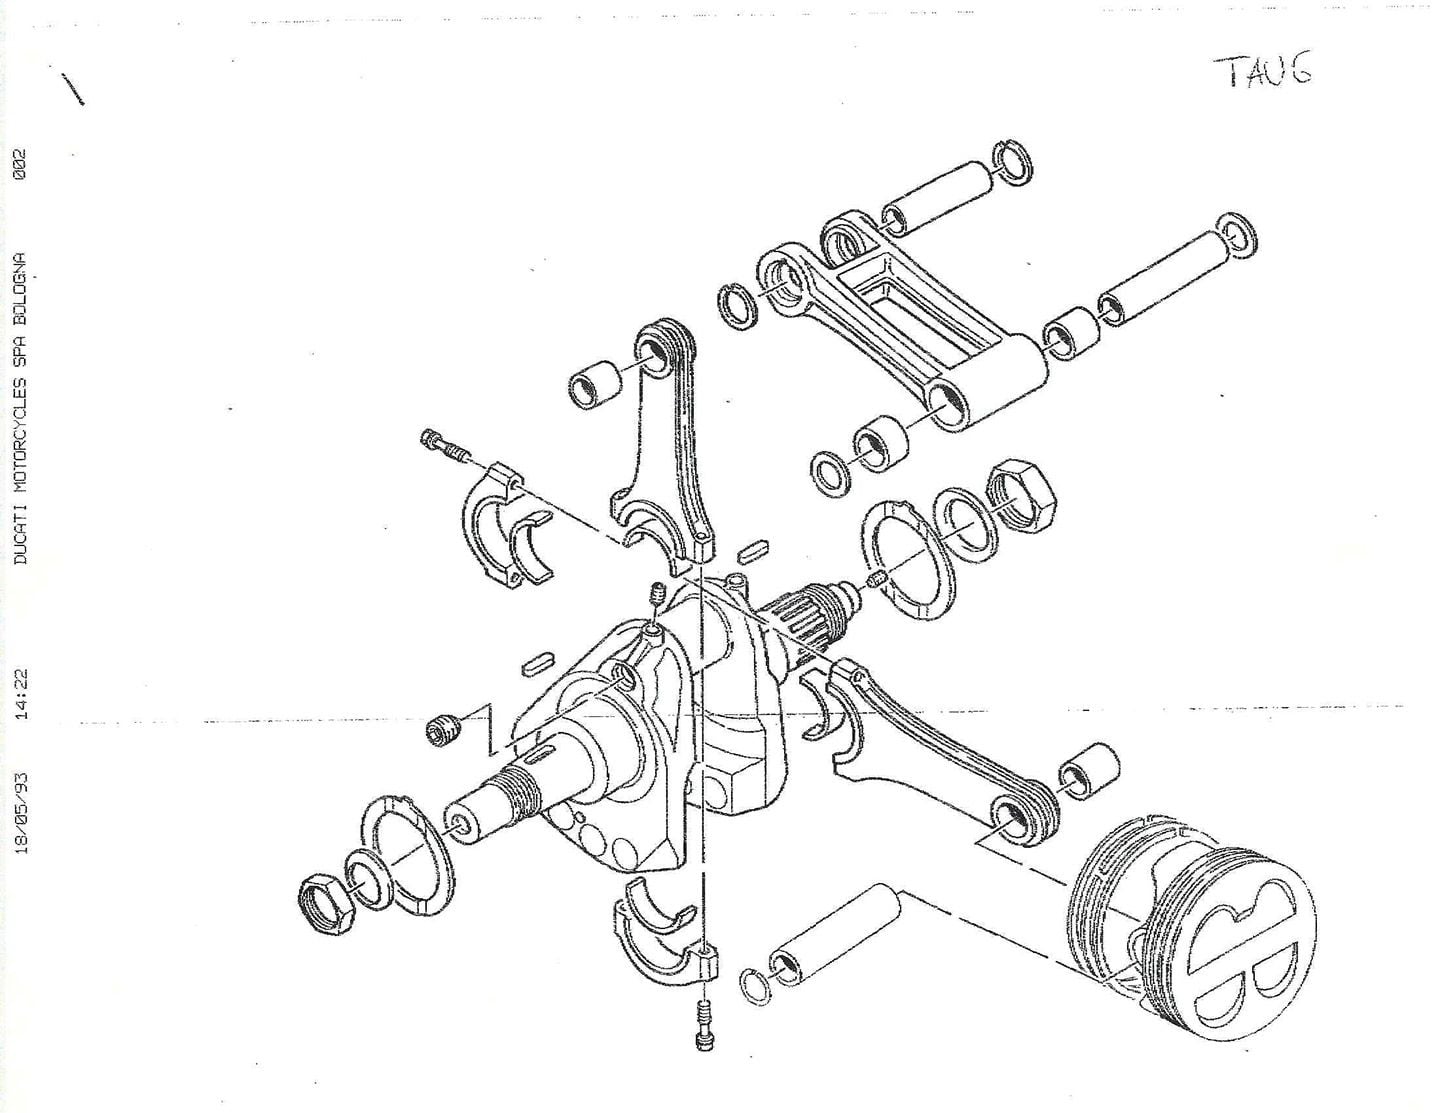 Another angle and different look at the 1993 Ducati Supermono engine internals. Two connecting rods, only one piston. Small print on the left edge of the image is the fax information: “Ducati Motorcycles SPA Bologna” from when it was sent to the Cycle World fax machine in May 1993.